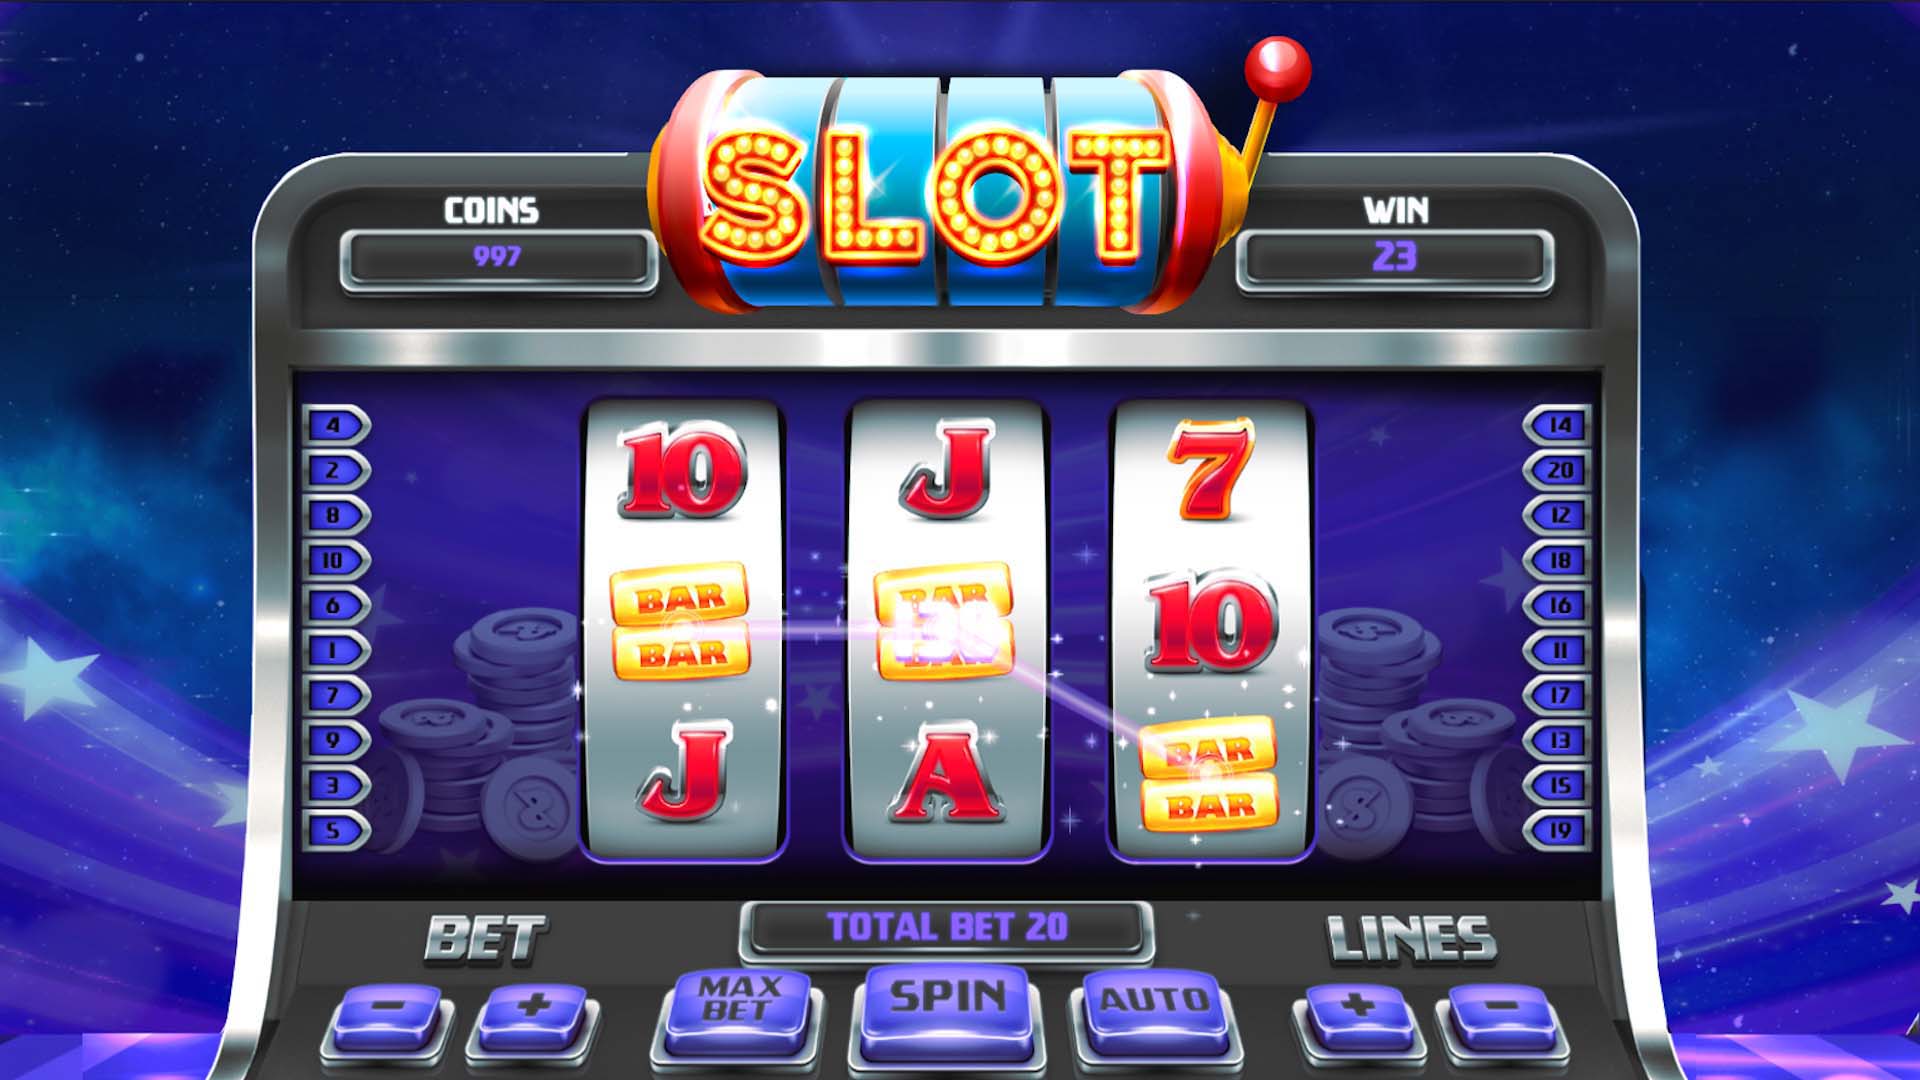 How to win on slots at the online casino